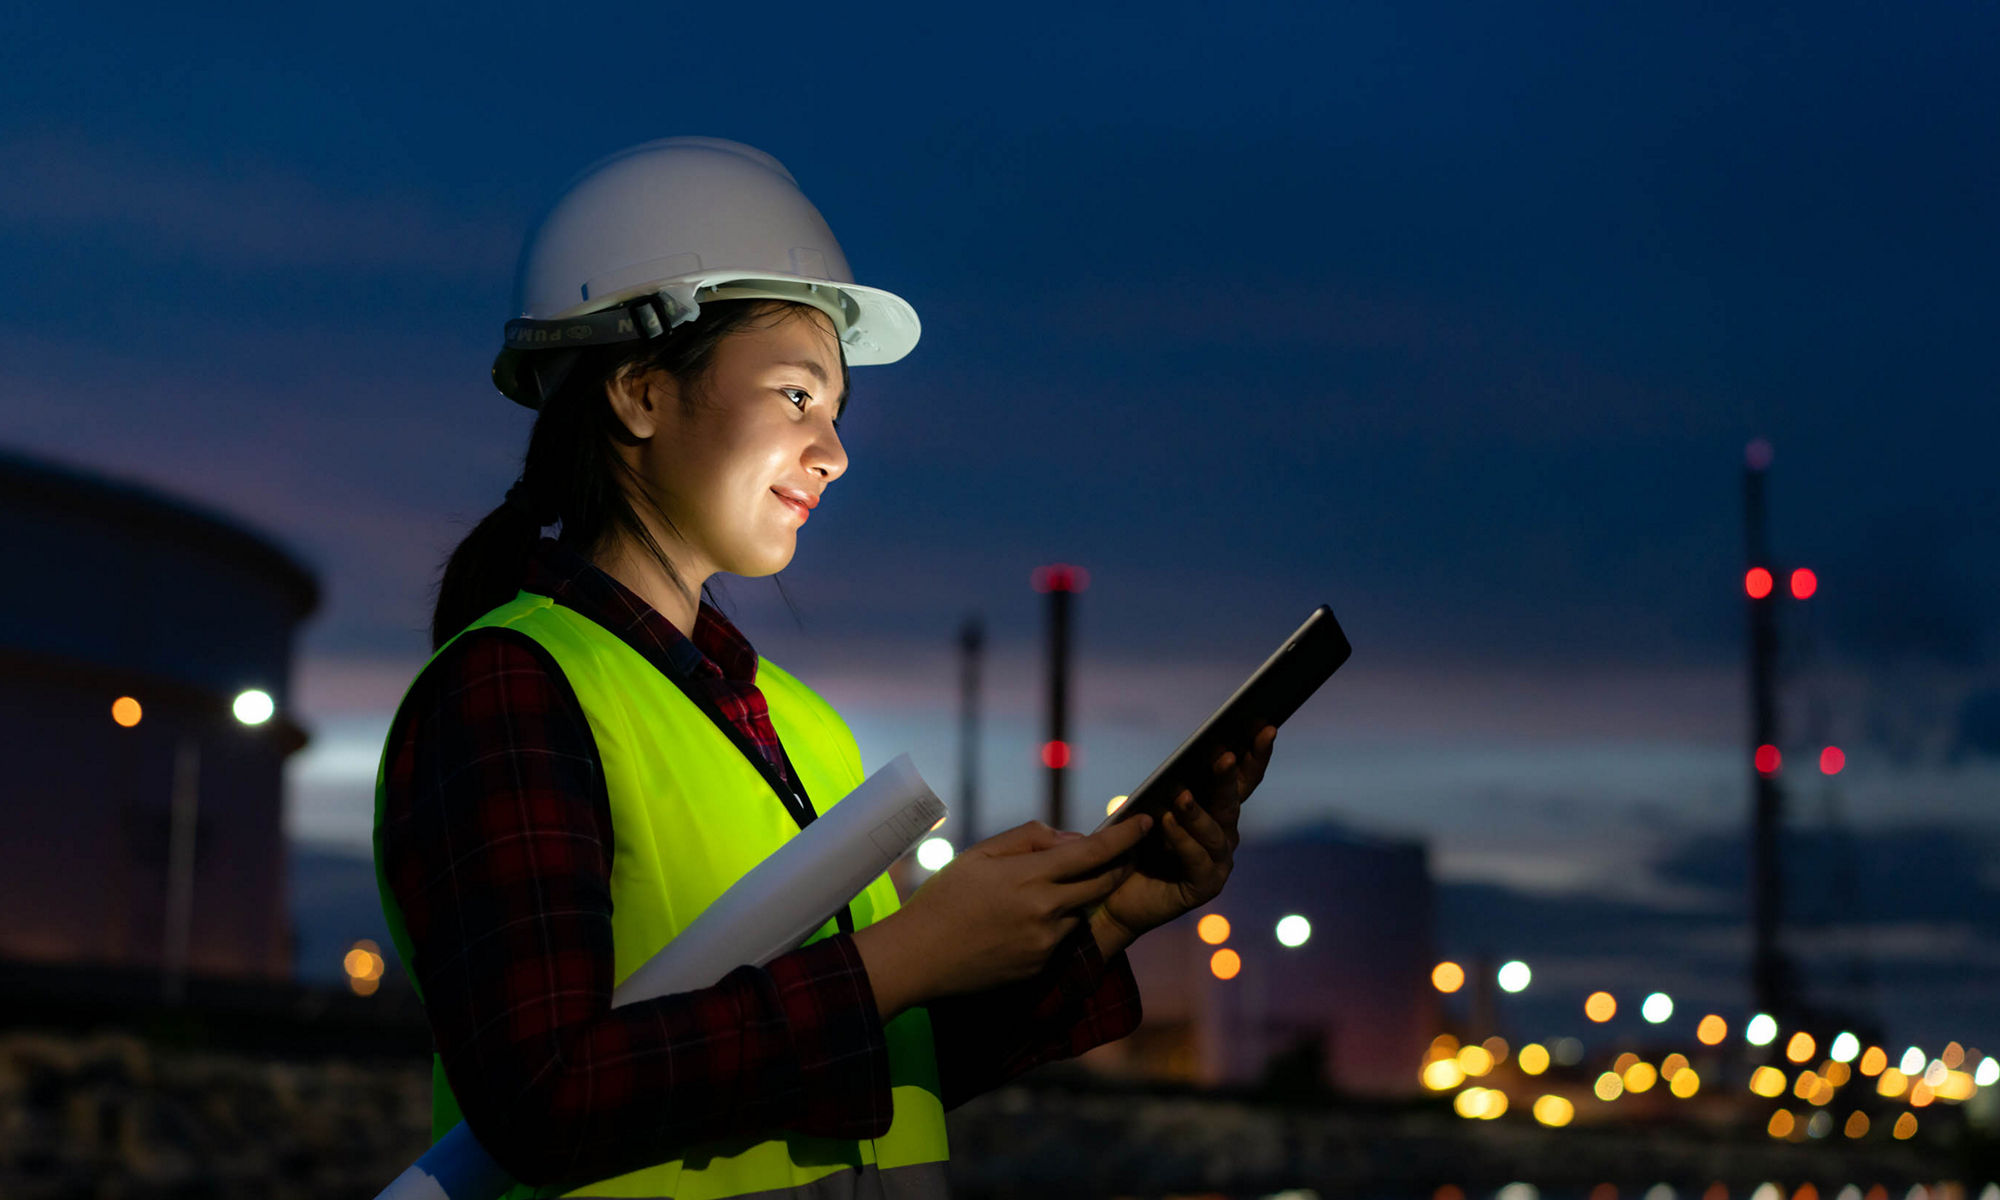 sian woman petrochemical engineer working at night with digital tablet Inside oil and gas refinery plant industry factory at night for inspector safety quality control.